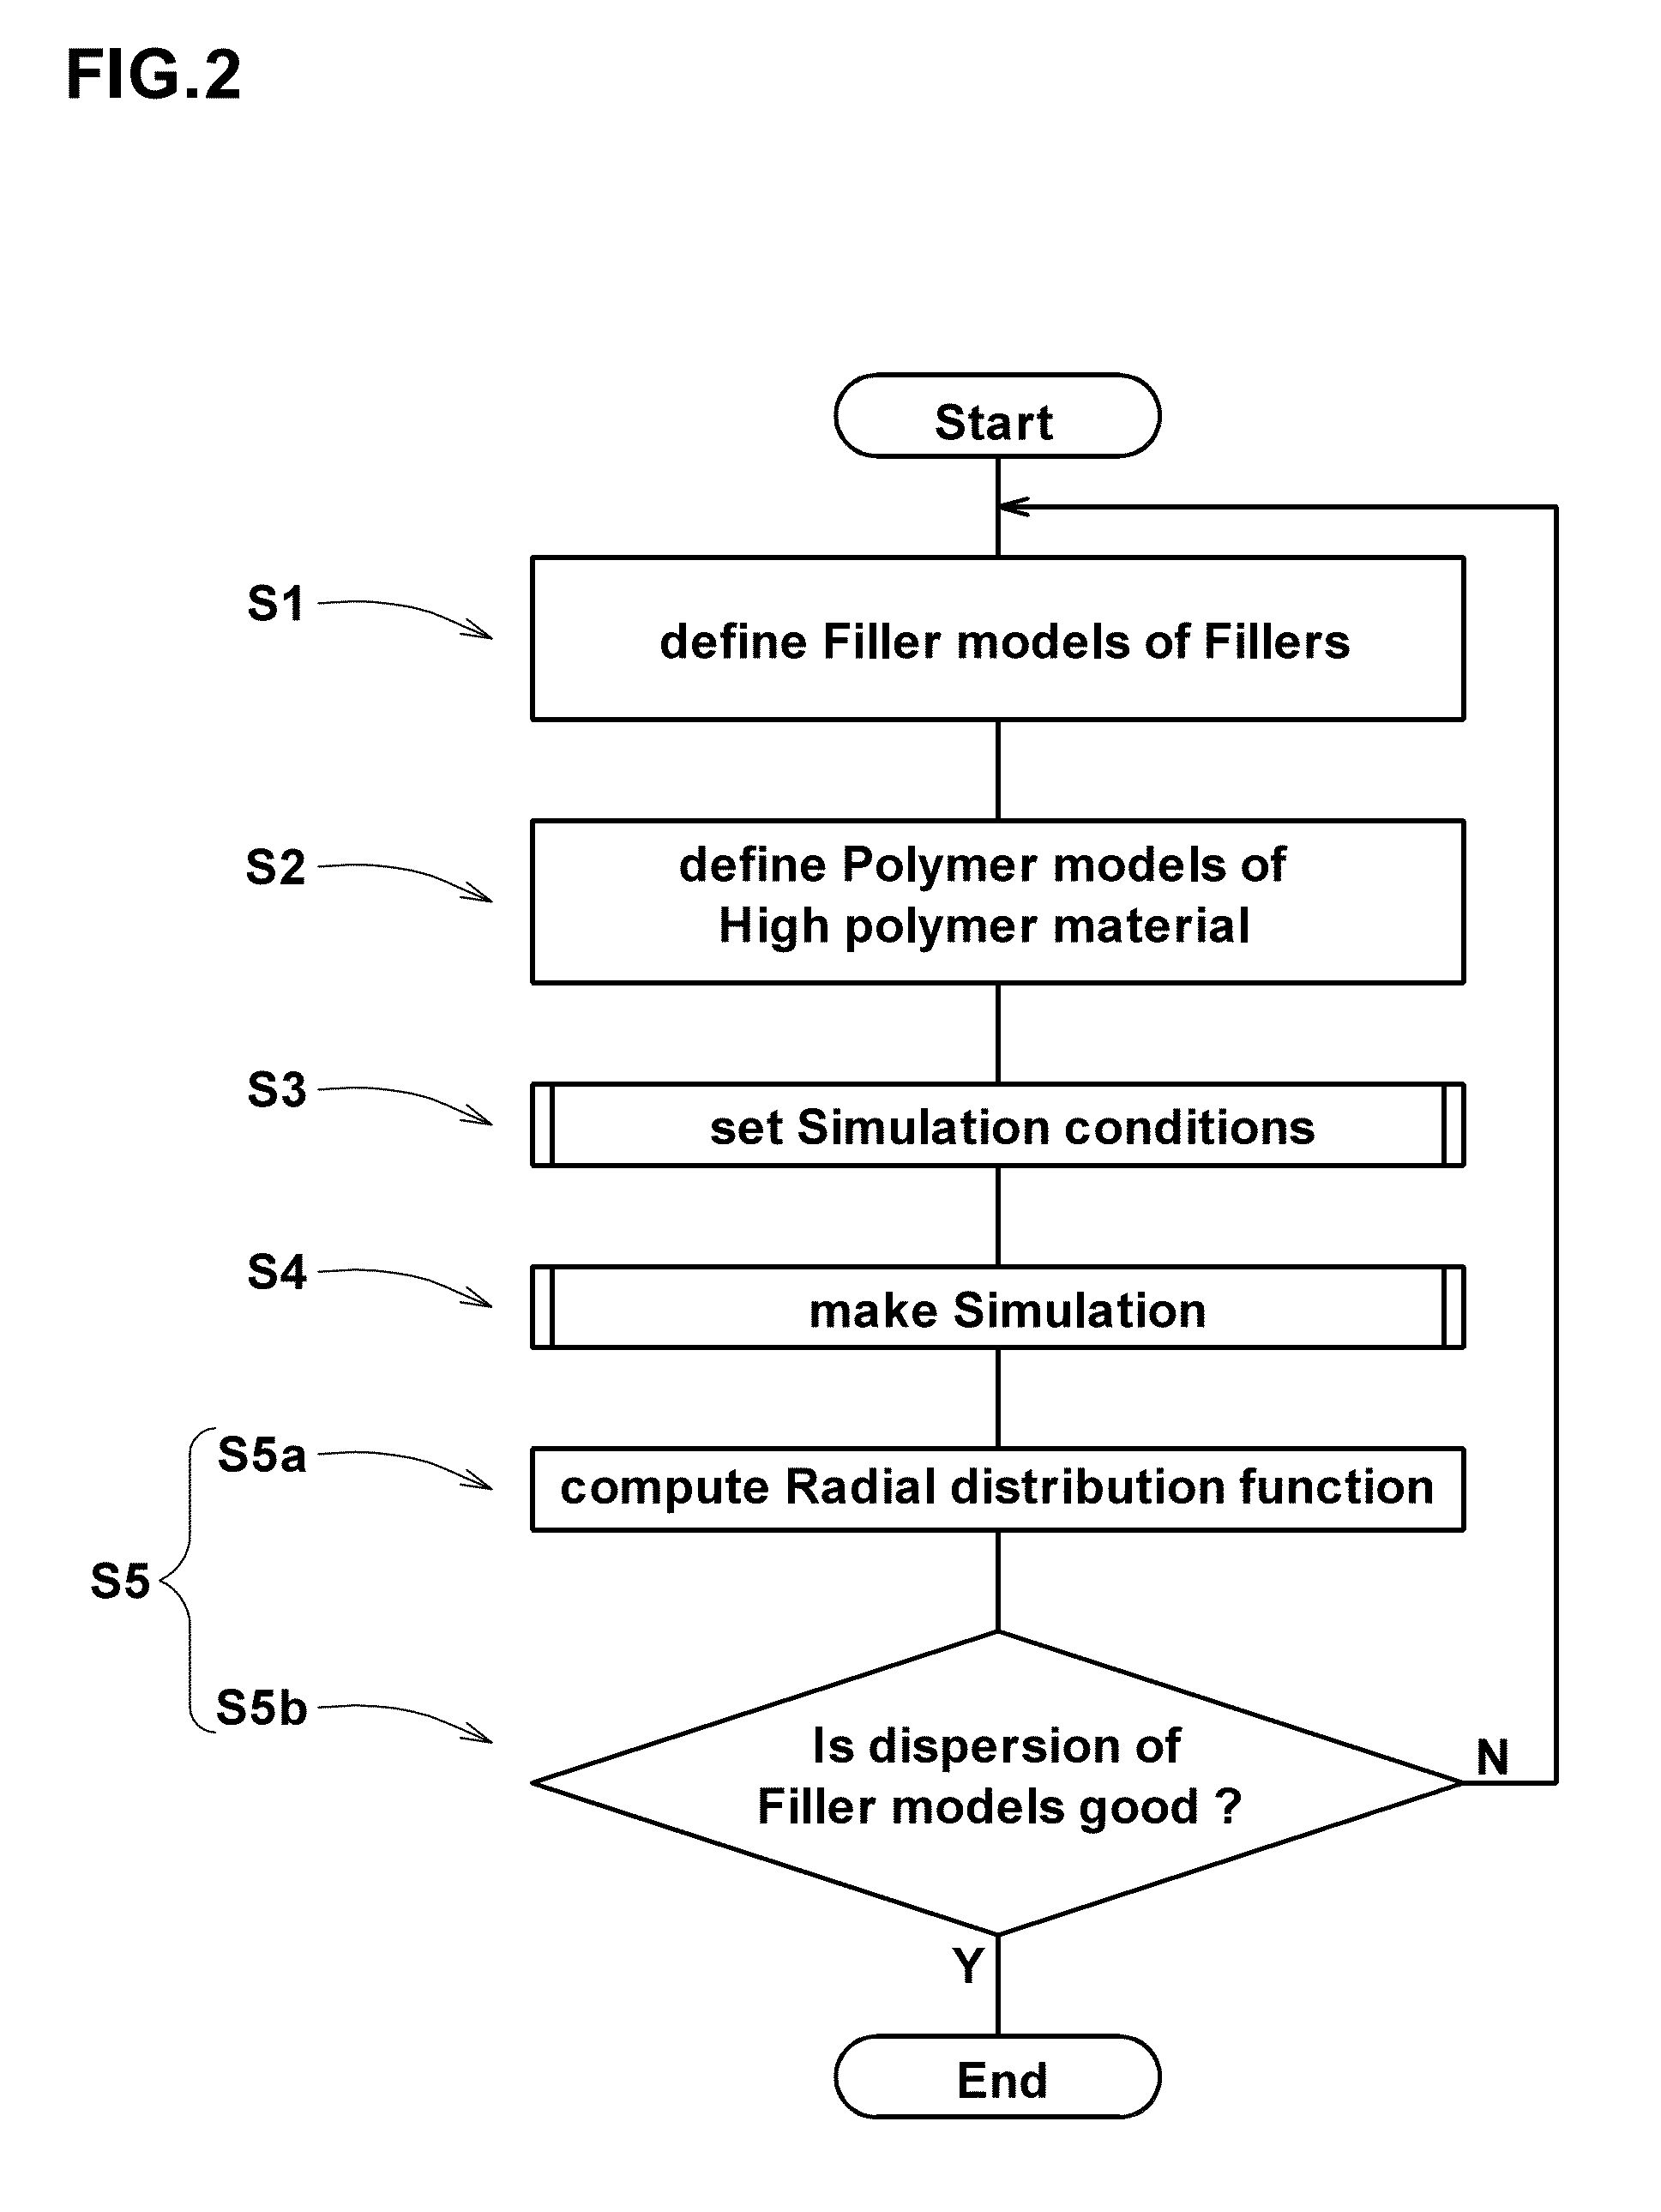 Simulation method for high polymer material